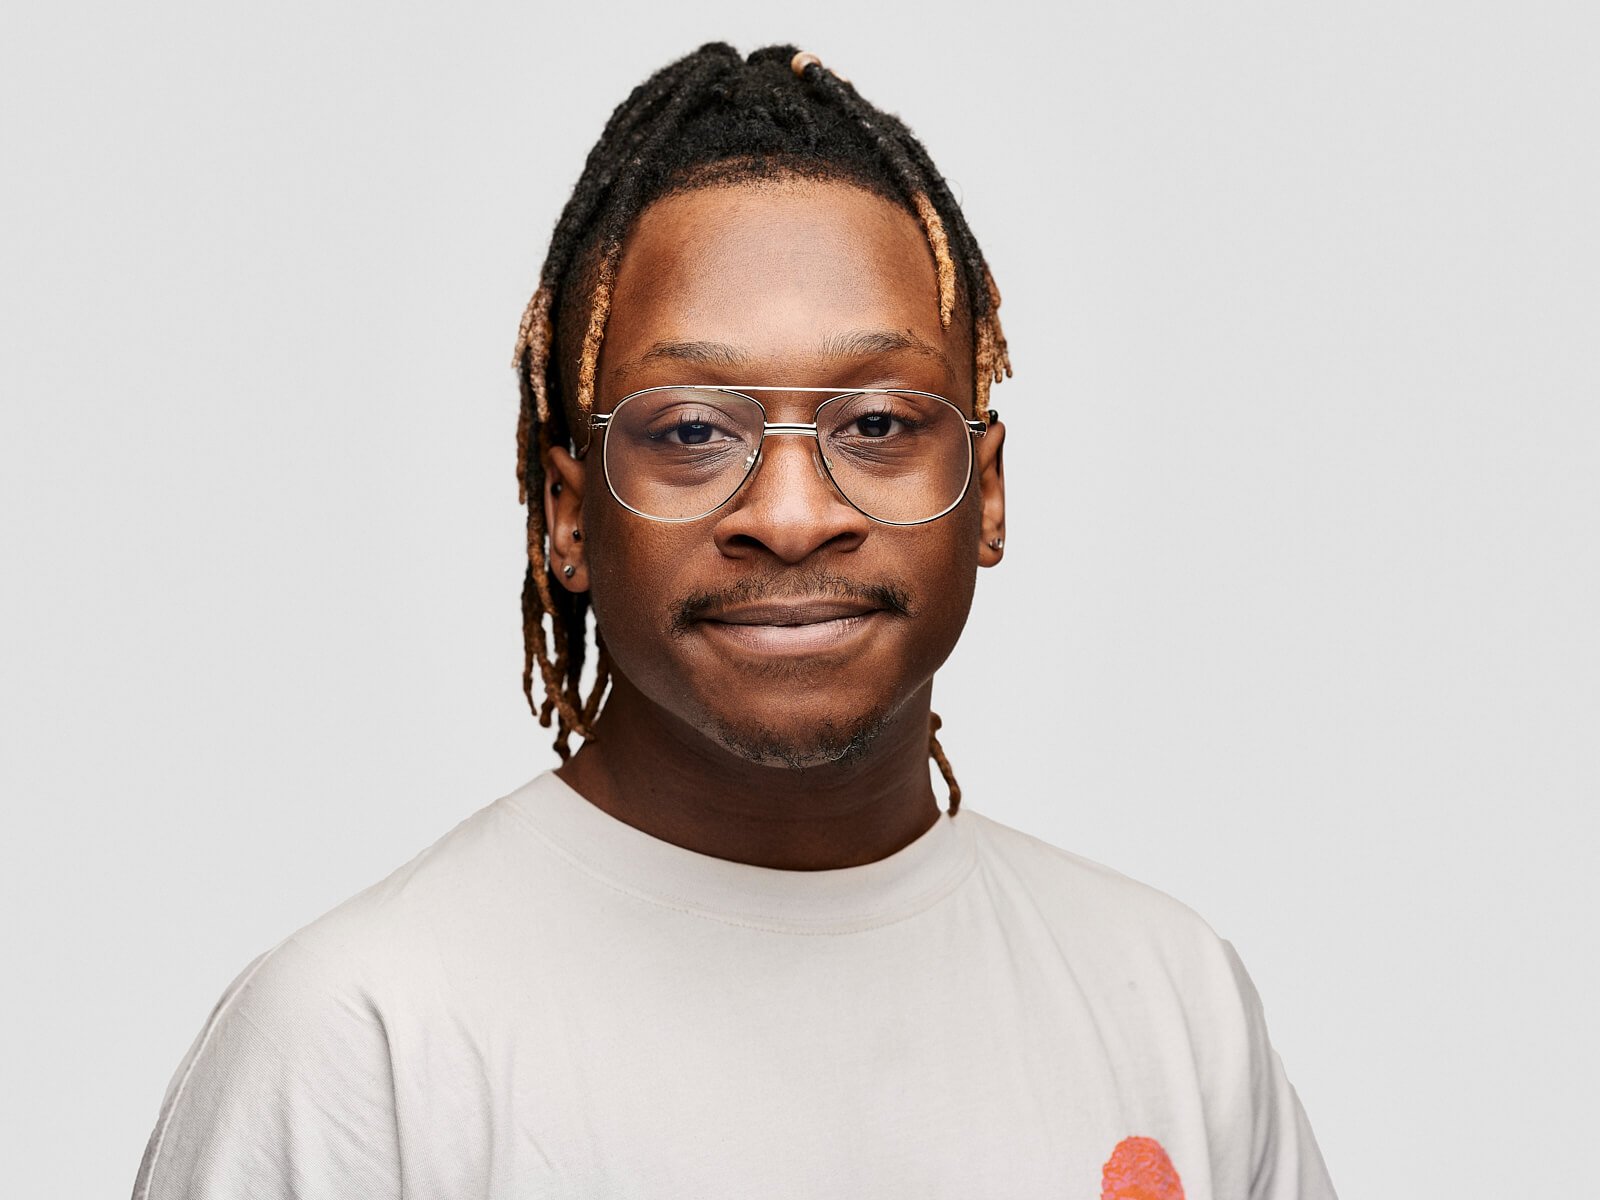 Team headshot of smiling black man with dreadlocks and glasses against a white background